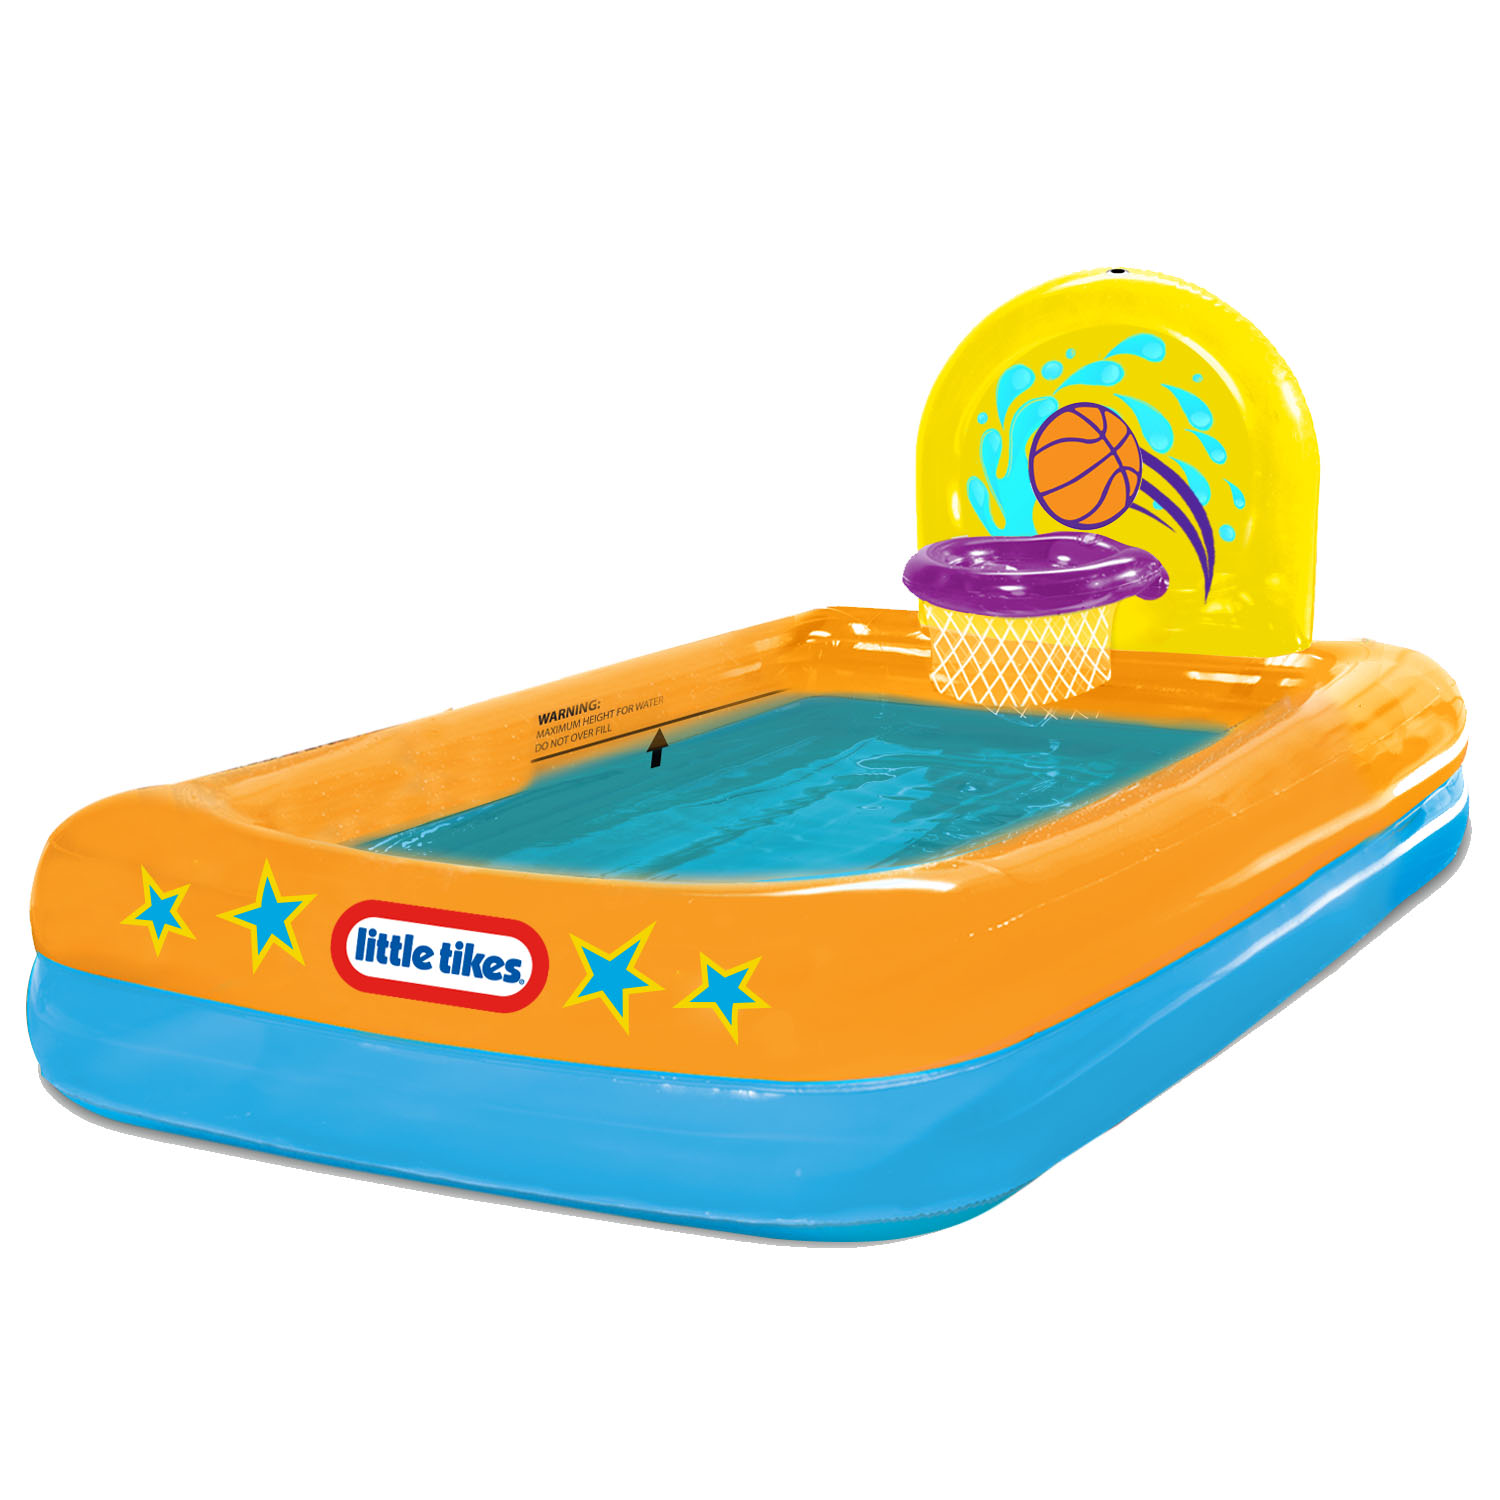 Little Tikes Splash Dunk Sprinkler Pool, Inflatable Pool with Basketball Hoop and Ball for Kids Ages 3-6 - image 4 of 5